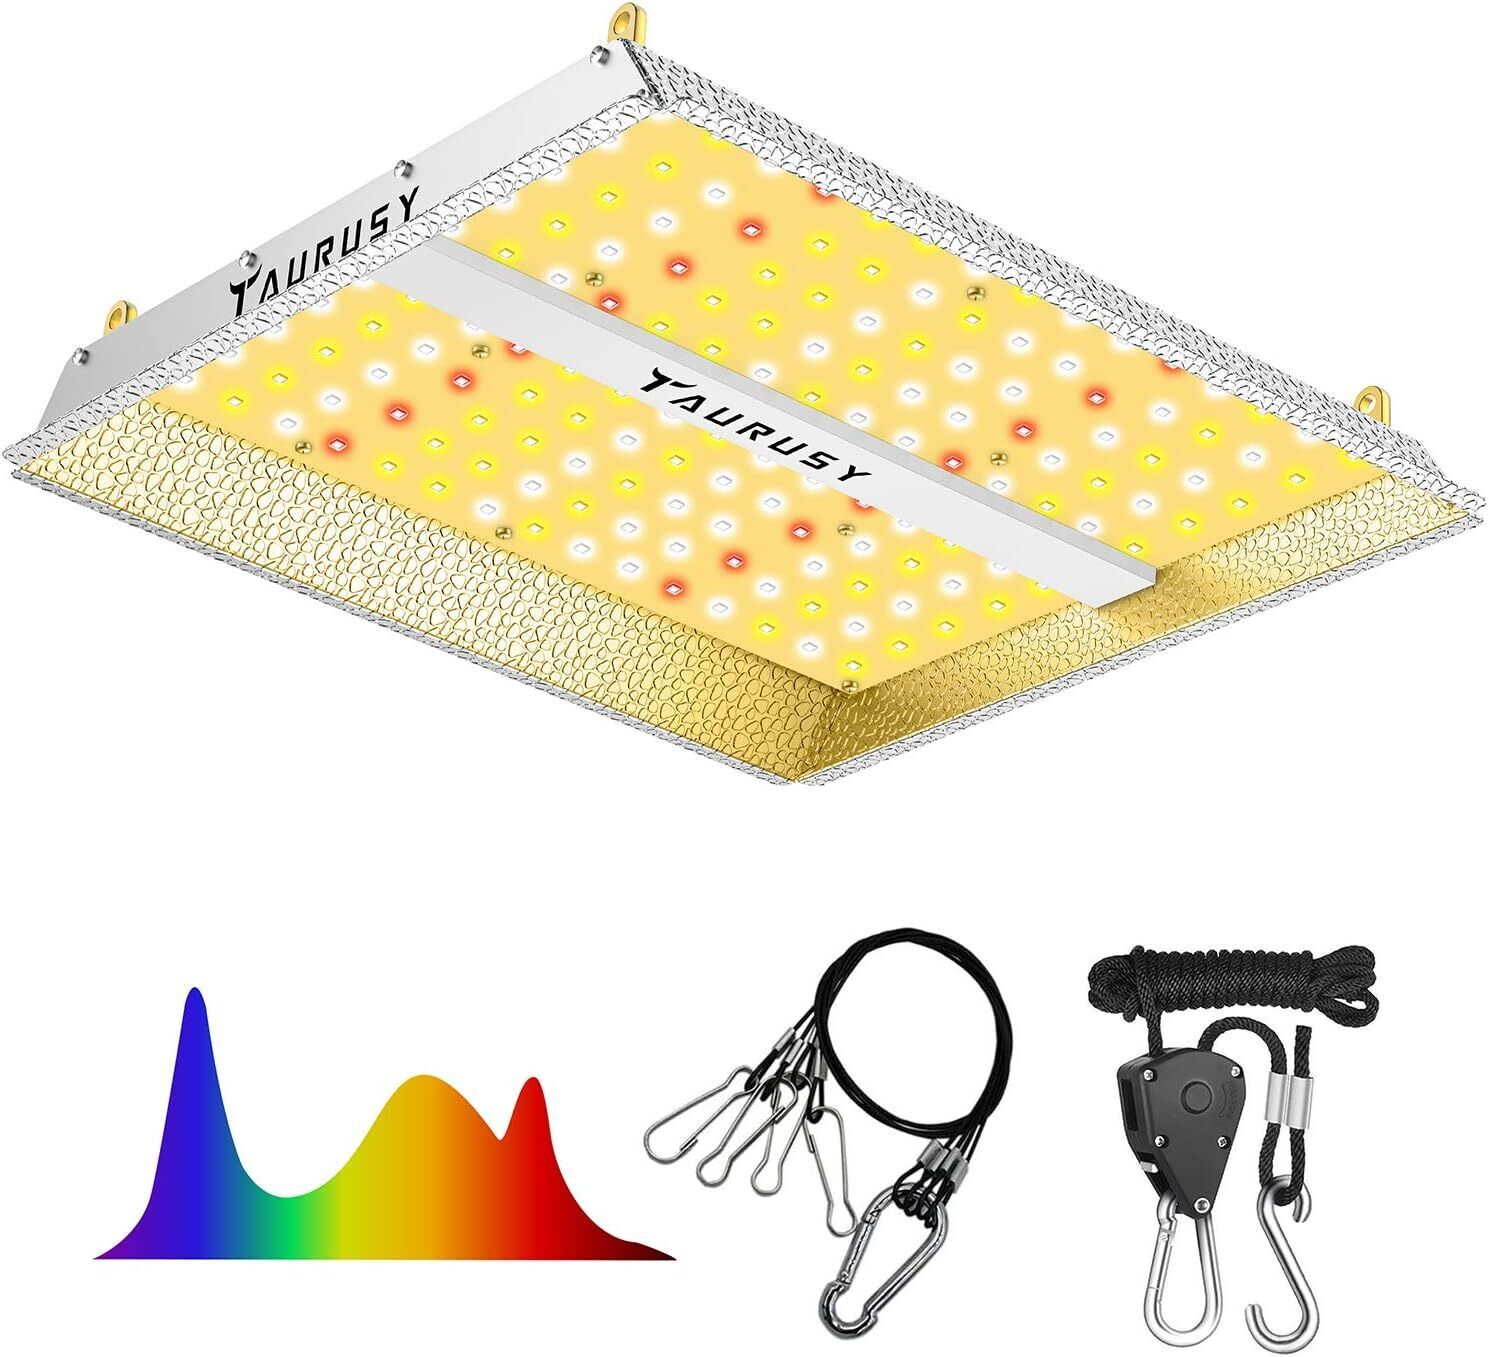 FULL SPECTRUM LED GROW LIGHT/LAMP for Indoor Plants Light for Hydroponics Greenh